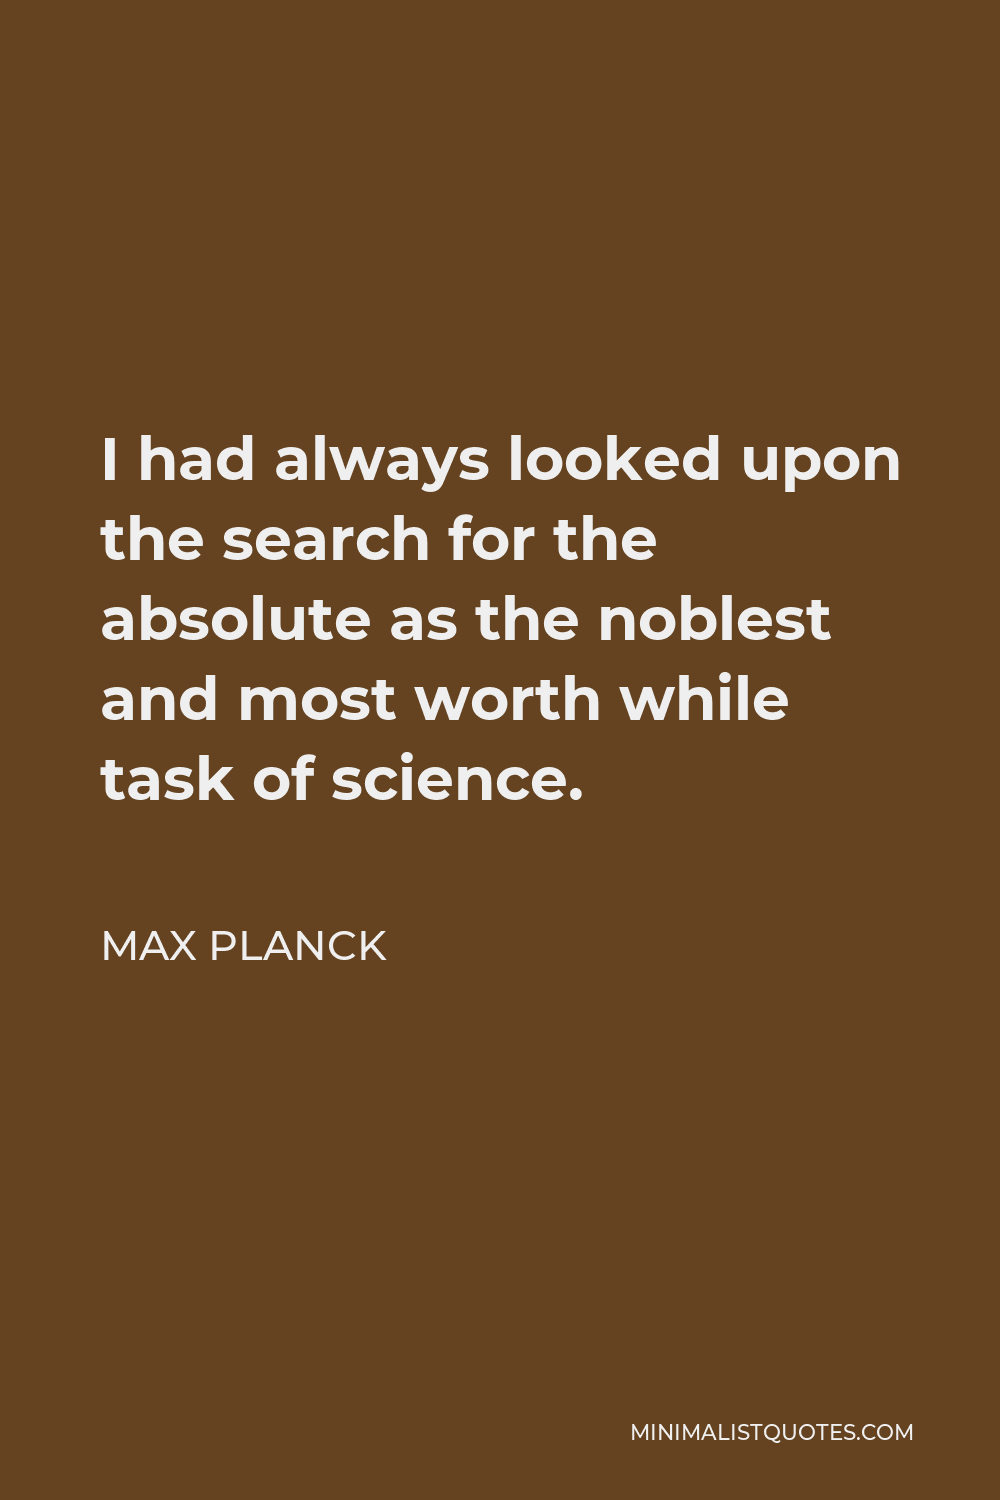 Max Planck Quote - I had always looked upon the search for the absolute as the noblest and most worth while task of science.